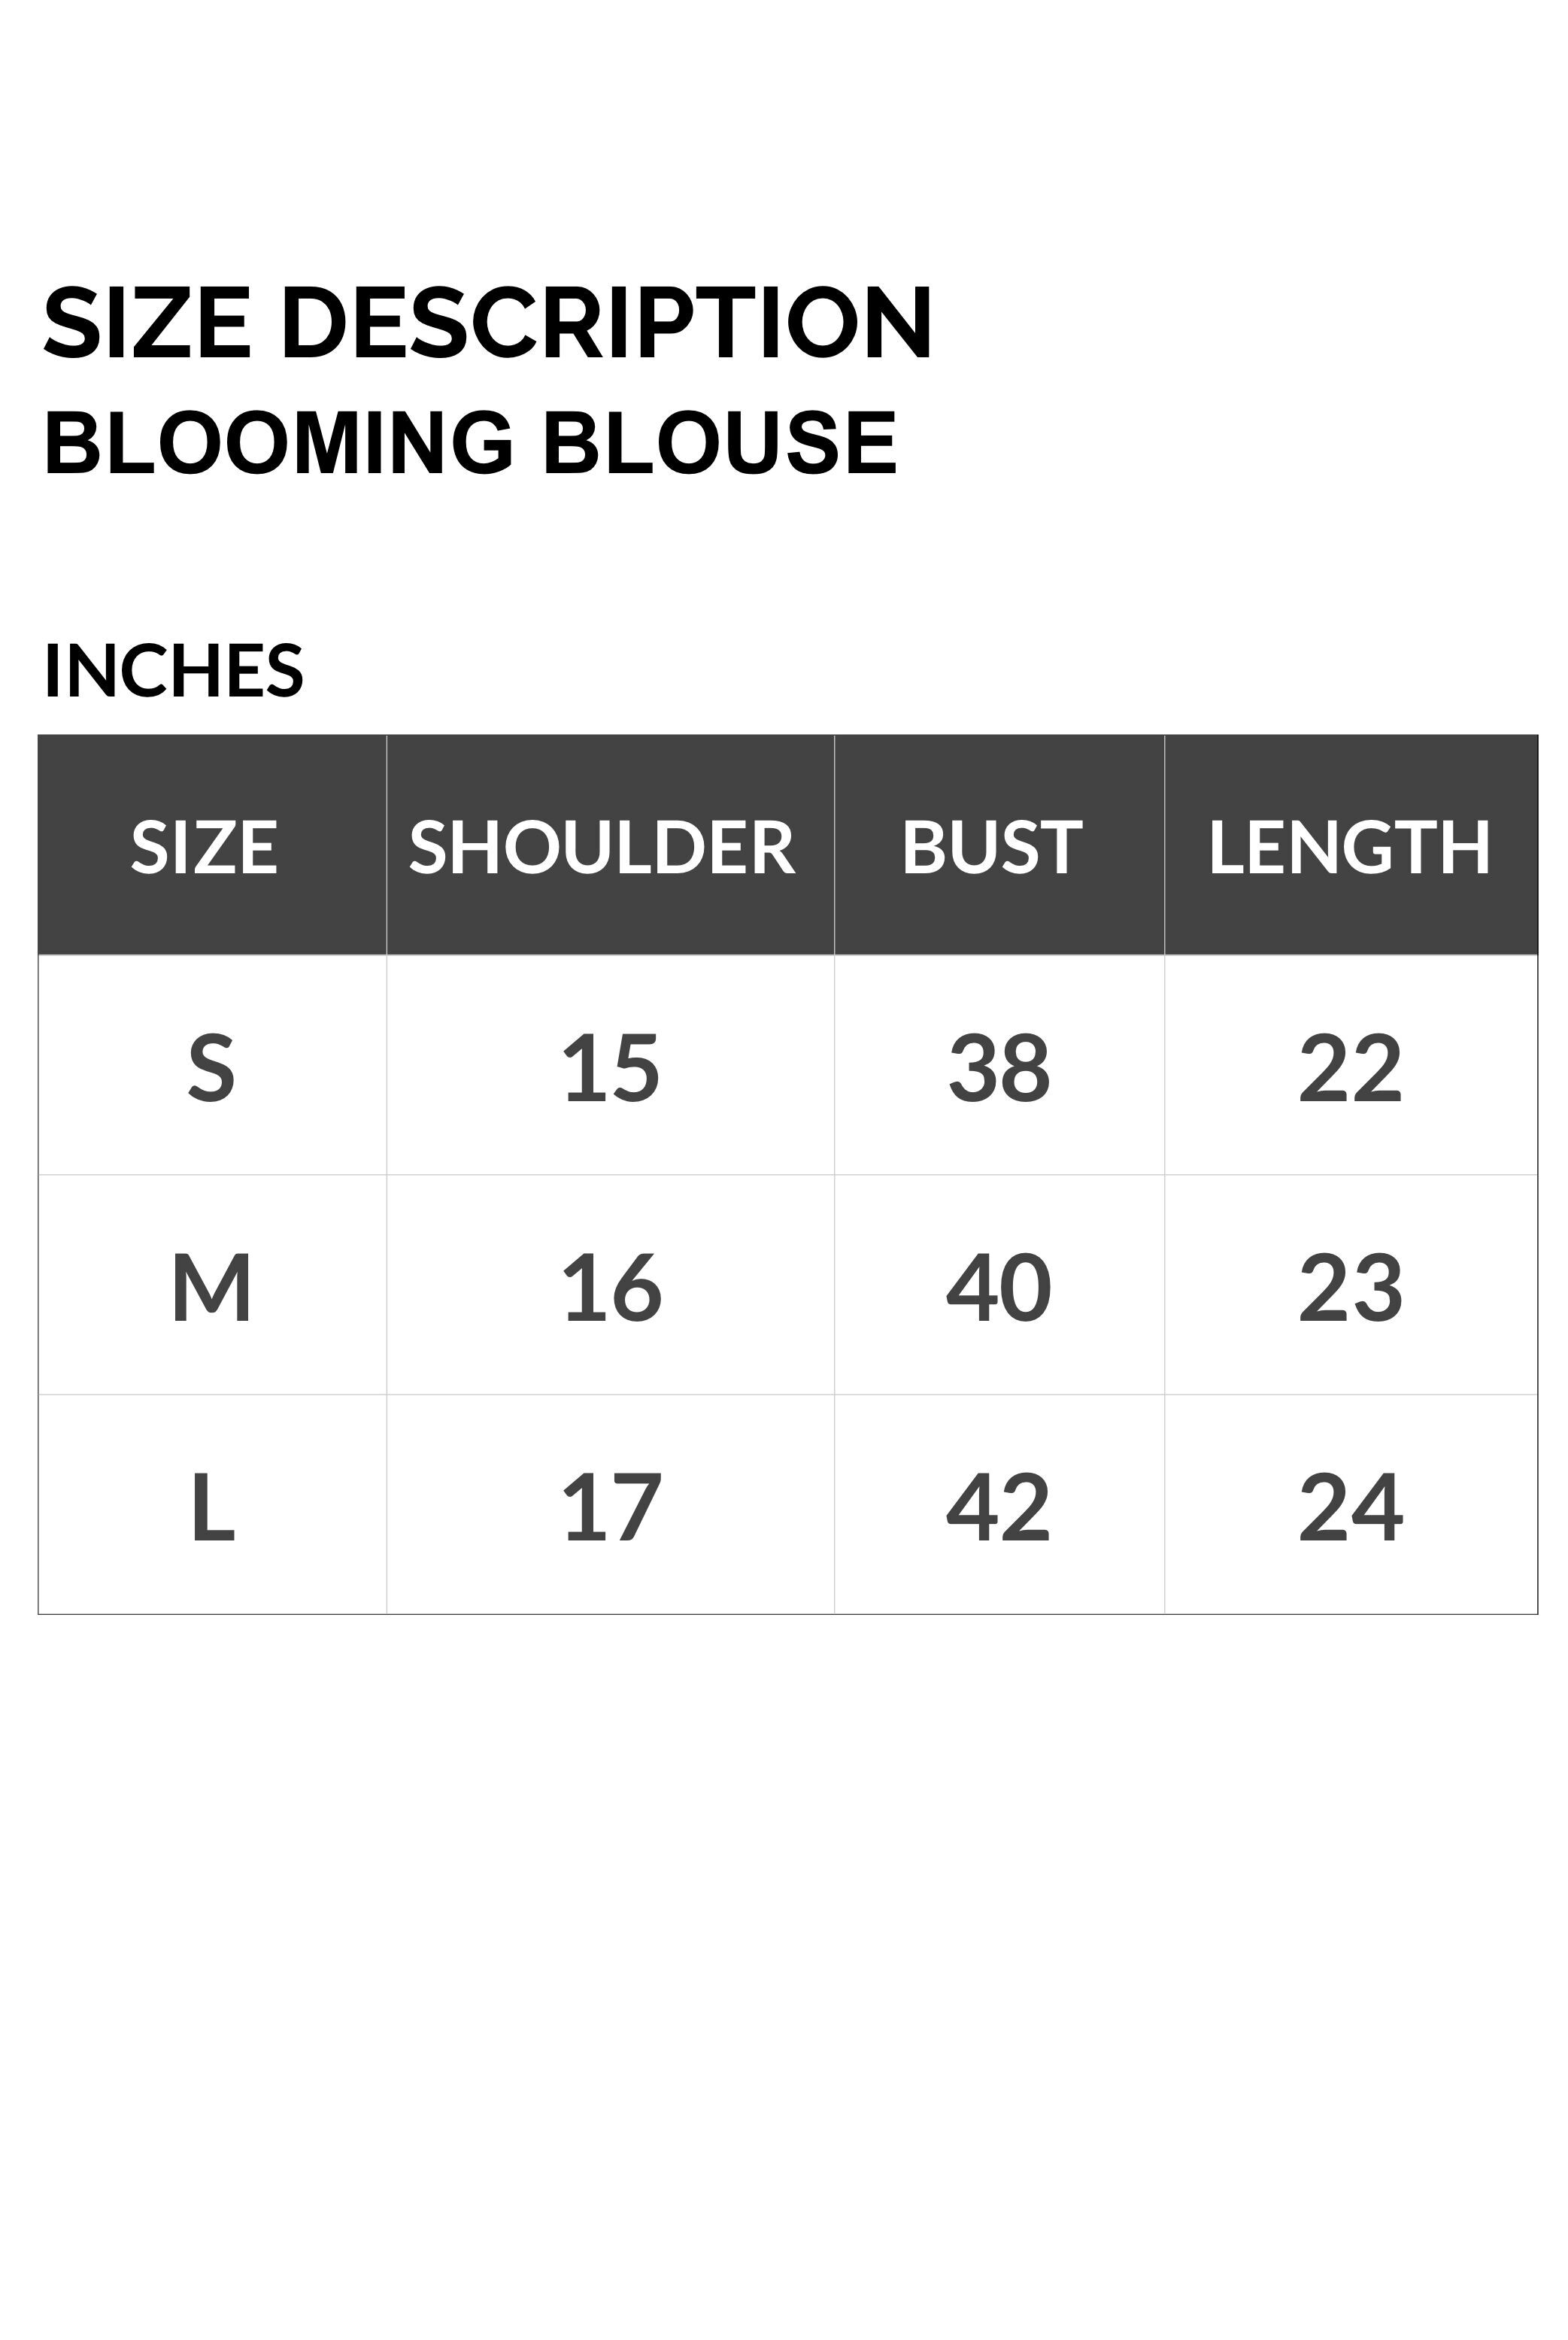 SIZE BLOOMING BLOUSE